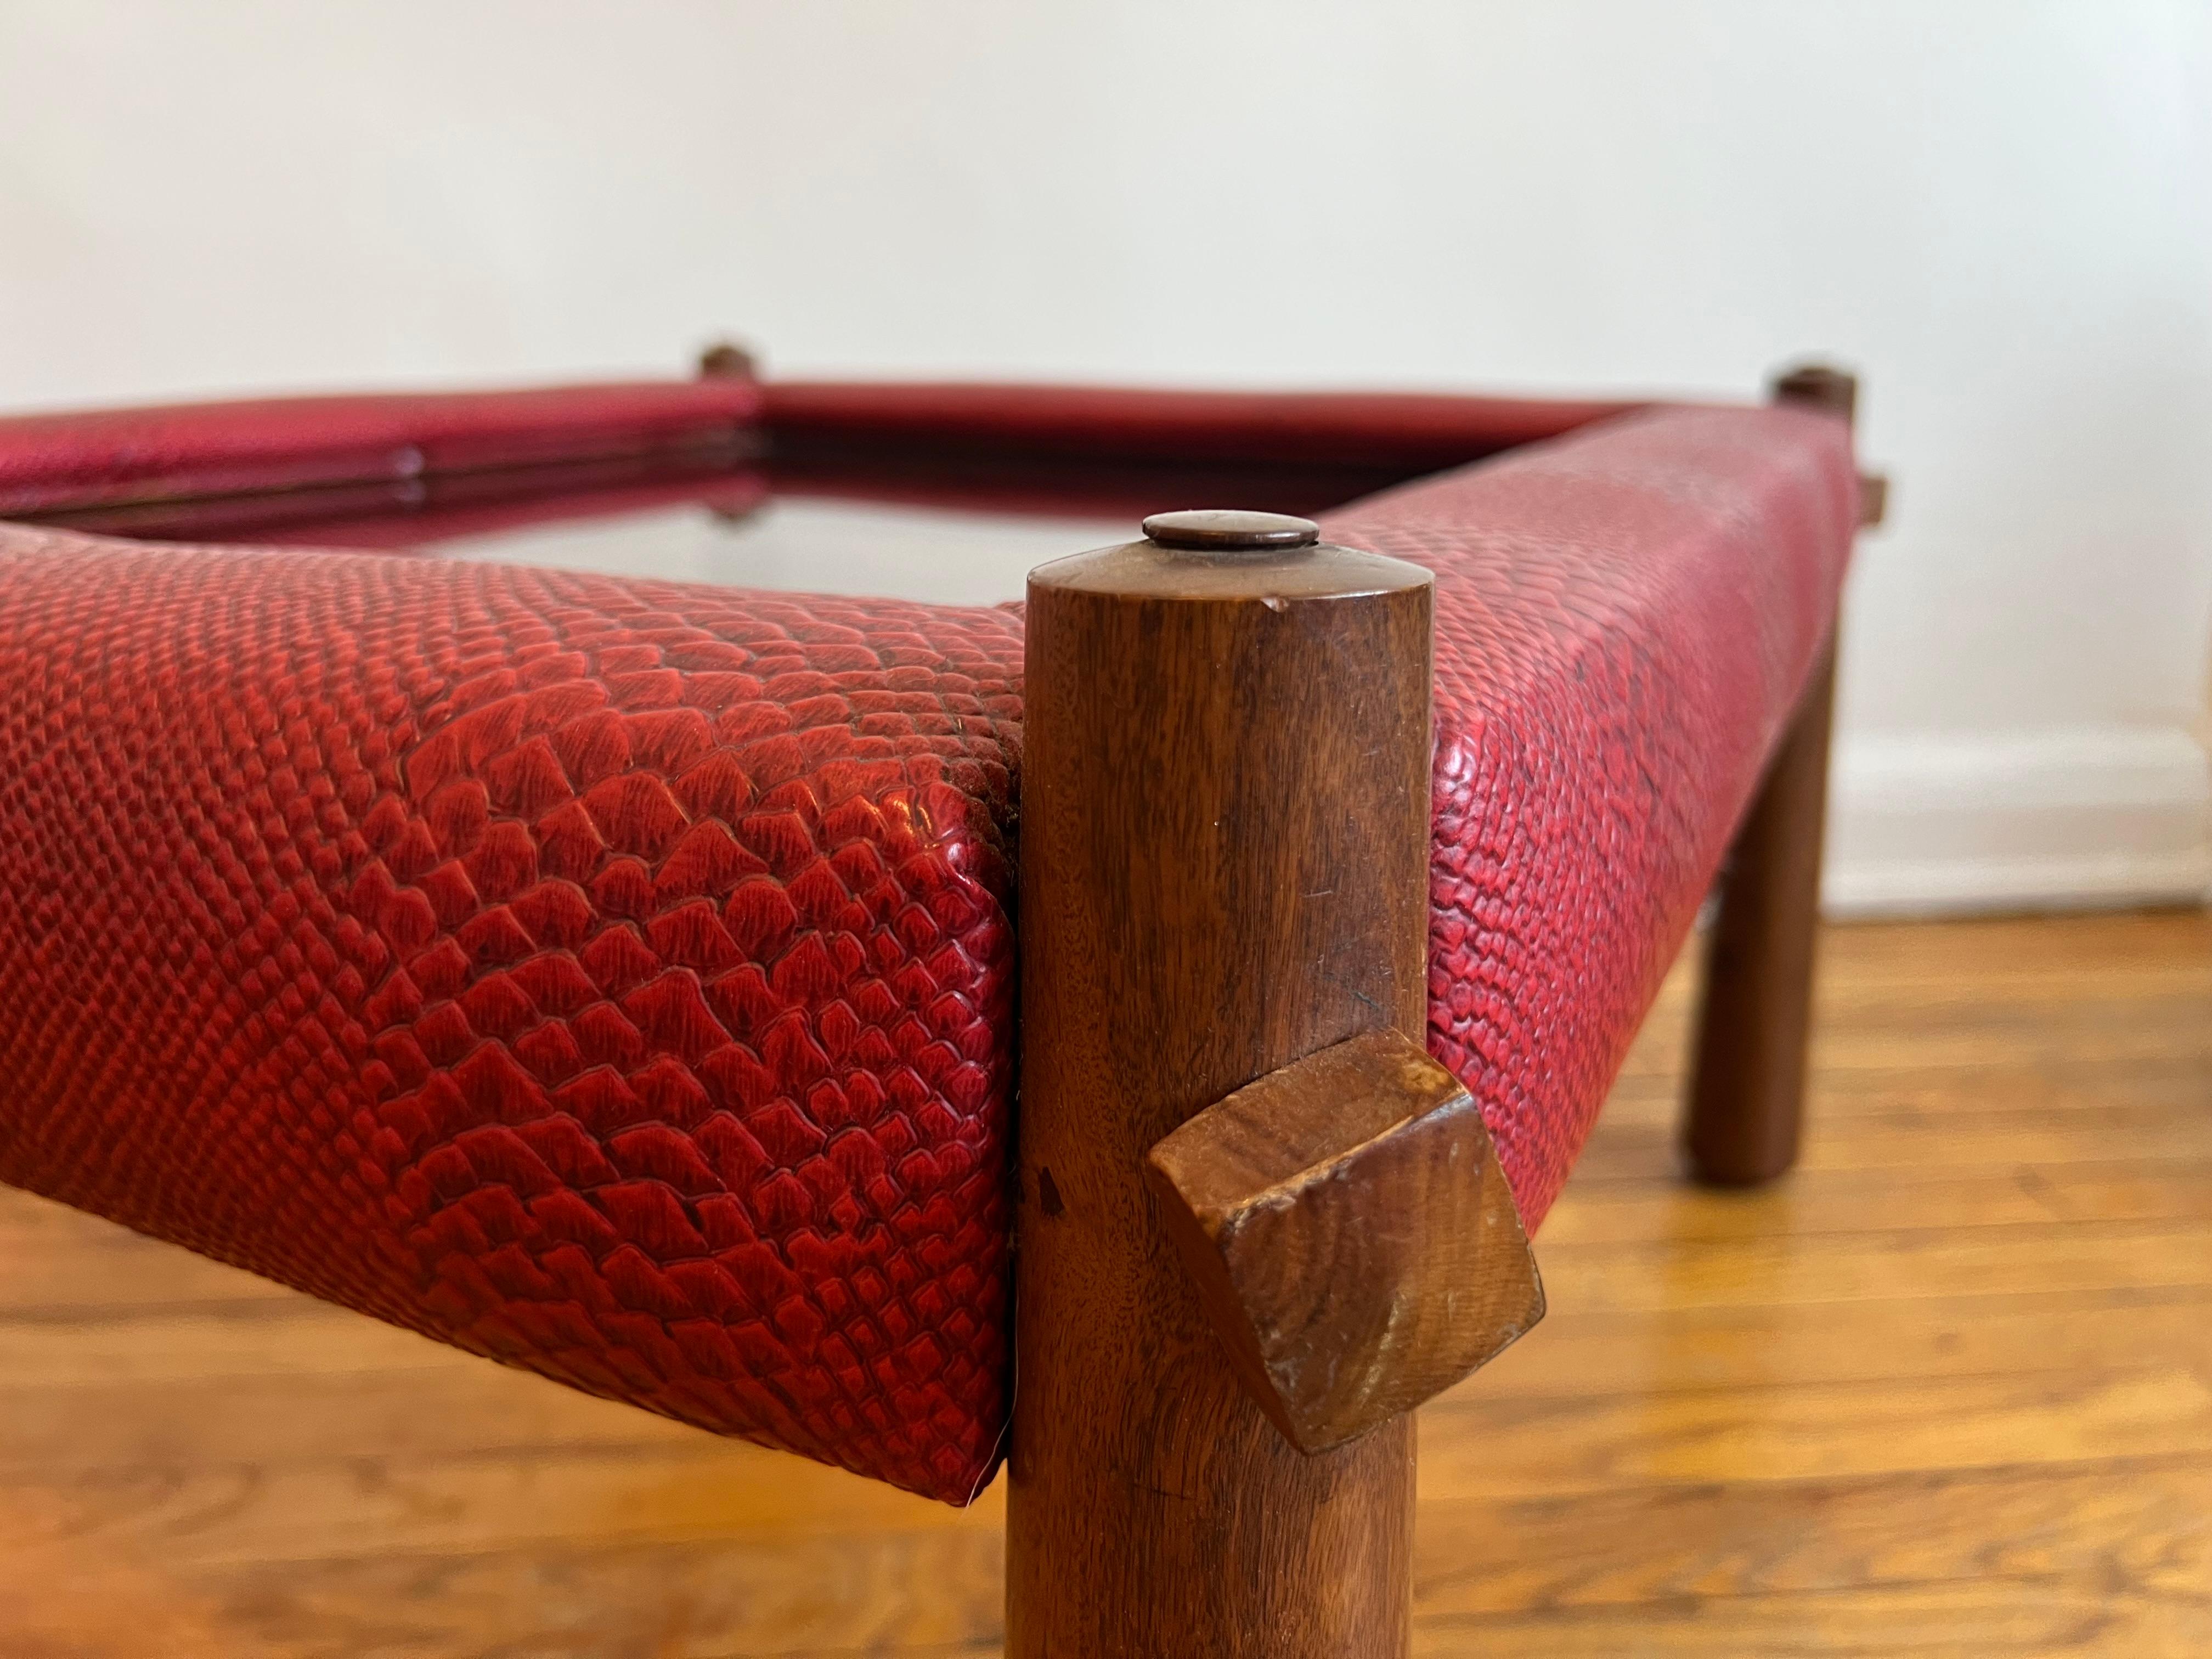 Percival Lafer MP-81 Coffee Table Red Snakeskin Embossed Leather In Good Condition For Sale In New York, NY